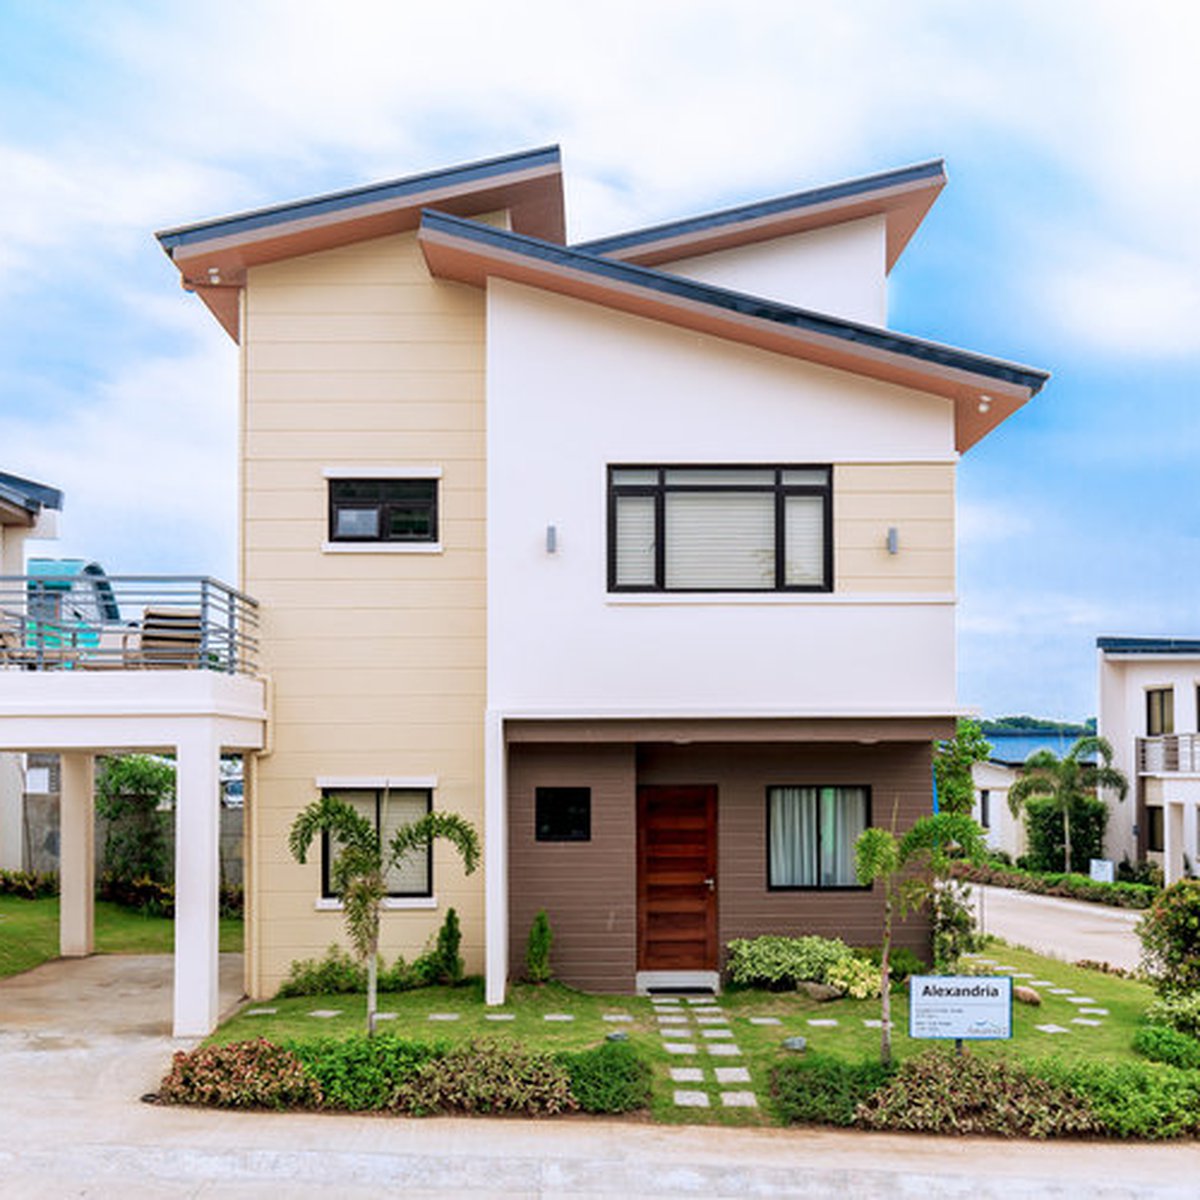 5-bedroom Single Attached House For Sale in Marilao Bulacan